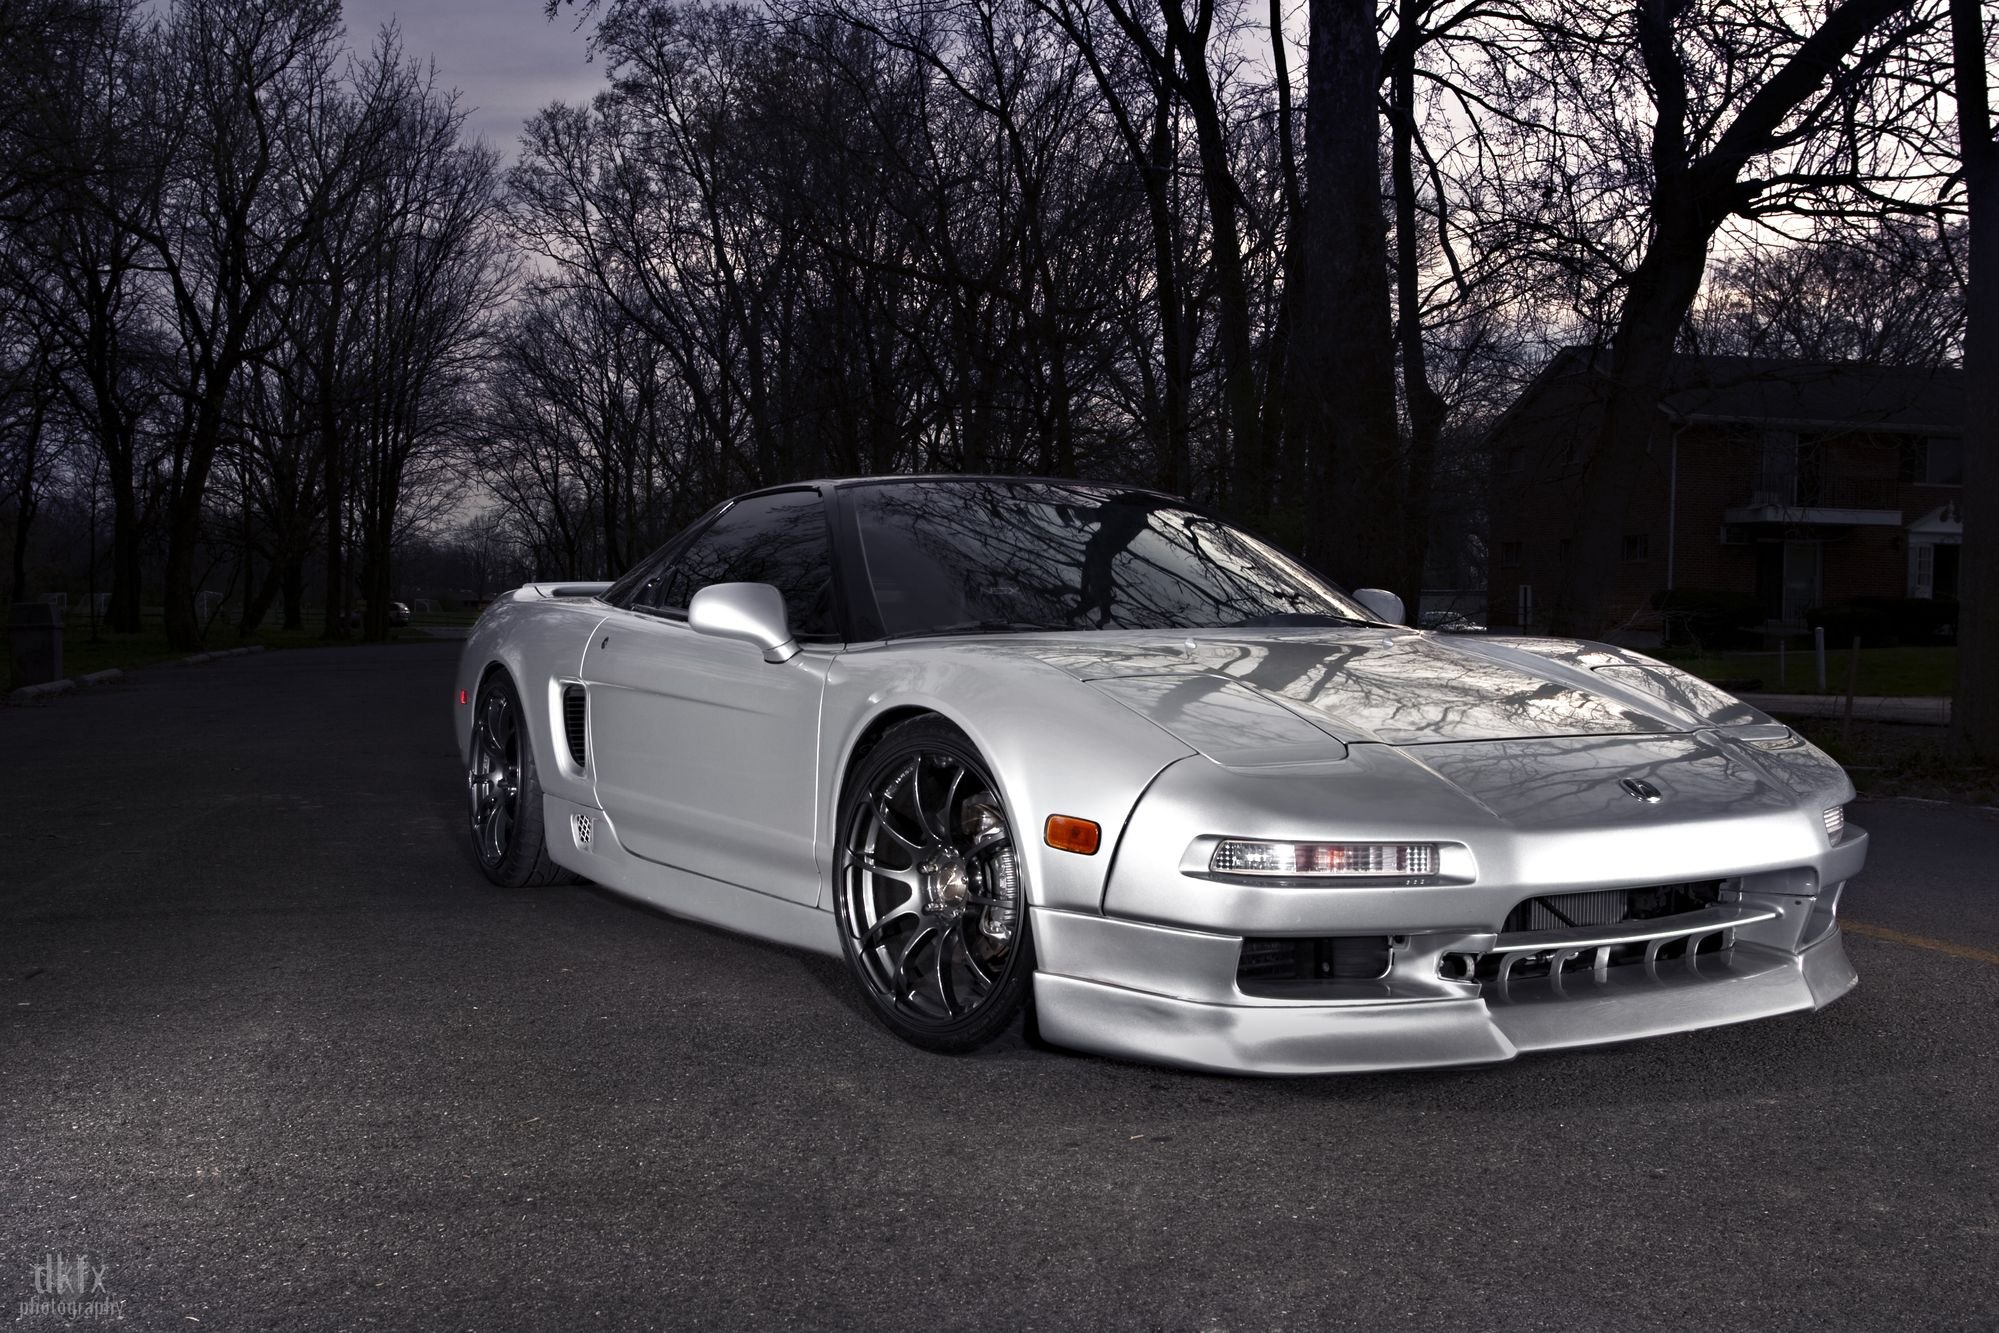 Aftermarket Front Bumper on Gray Acura NSX - Photo by dan kinzie